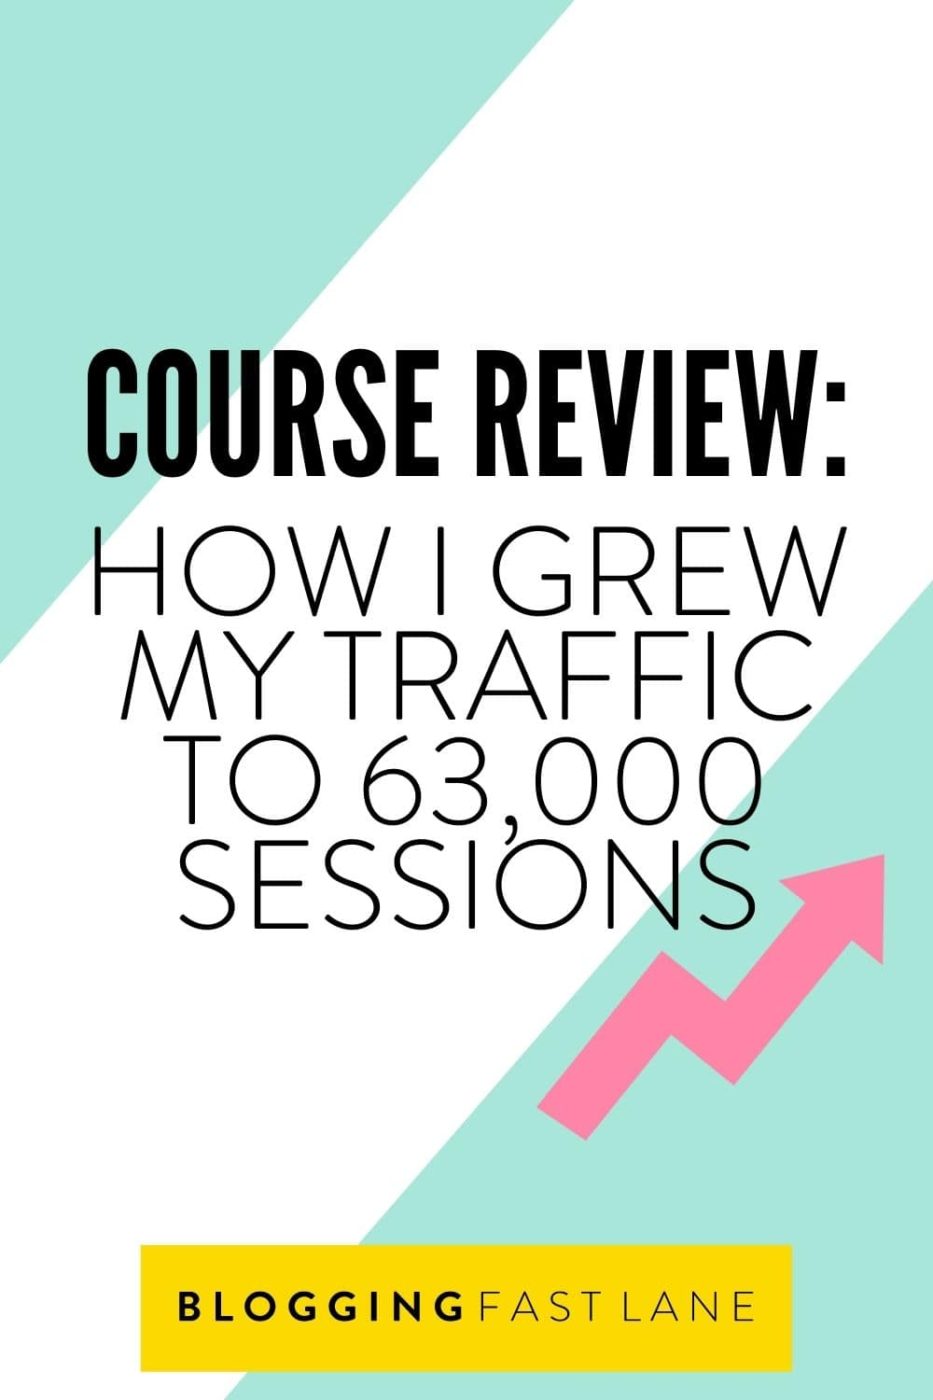 How to grow your traffic as a travel blogger #blogger